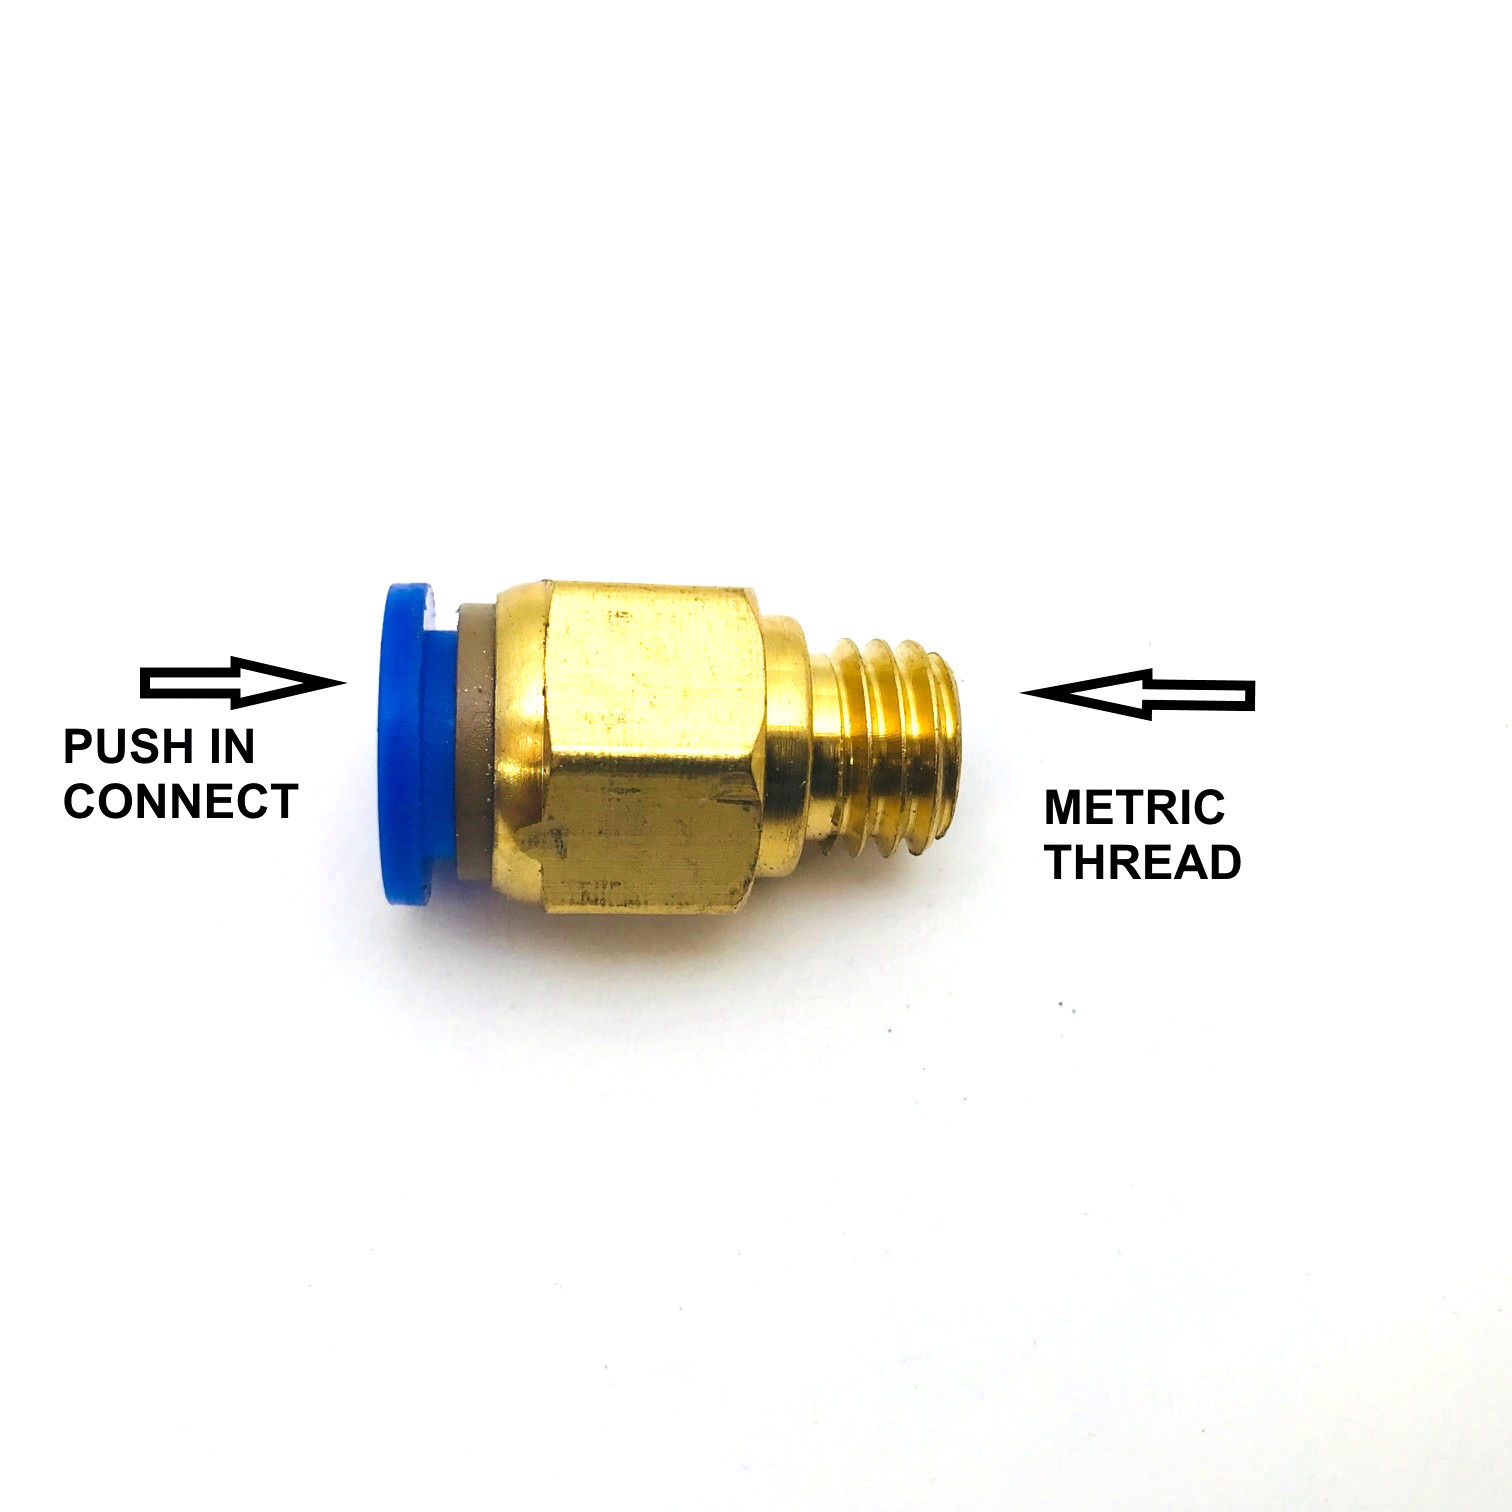 10 mm x 10 mm x 12 mm Tube OD SMC Corporation of America SMC KQ2U10-12A PBT Push-to-Connect Tube Fitting Different Diameter Union Wye 